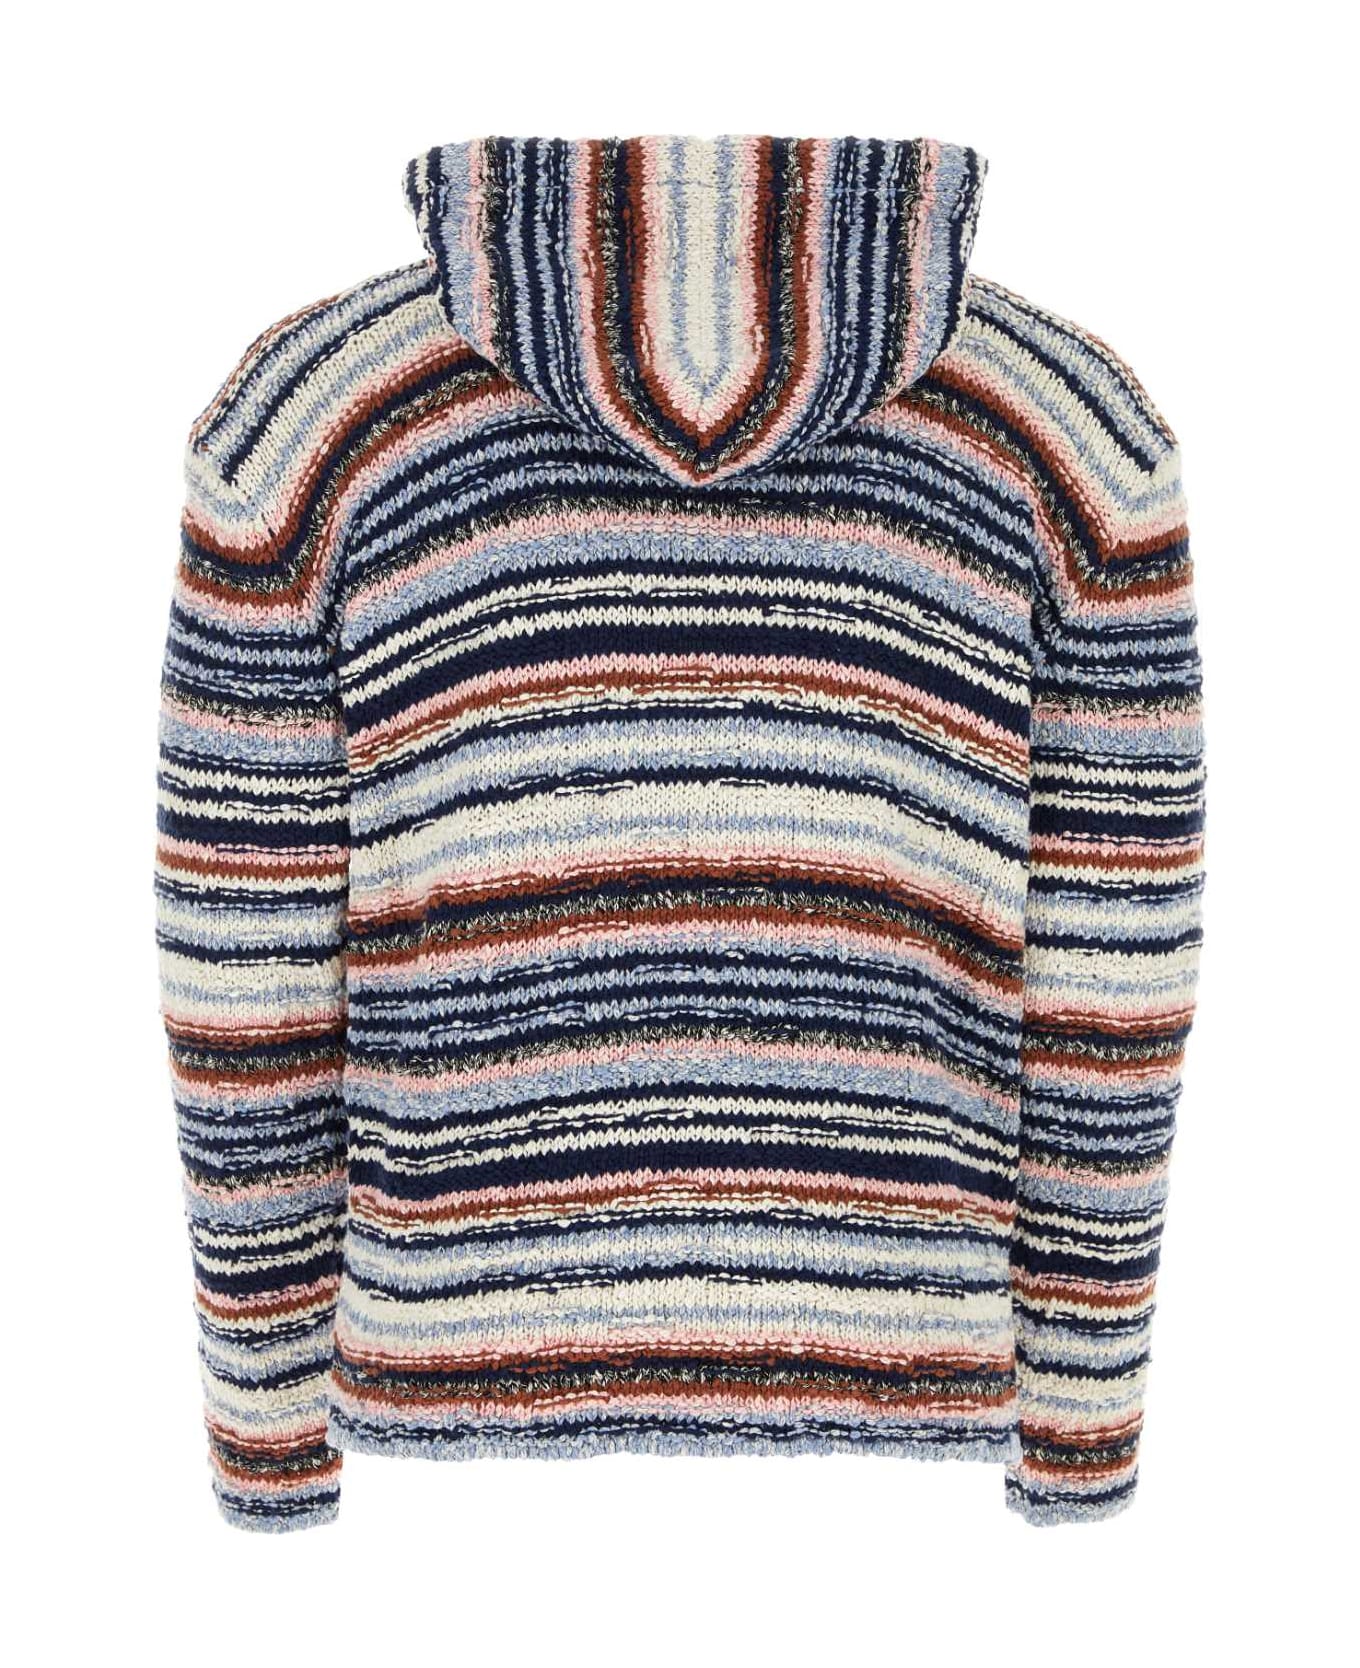 Marni Embroidered Cotton Sweater - OPAL